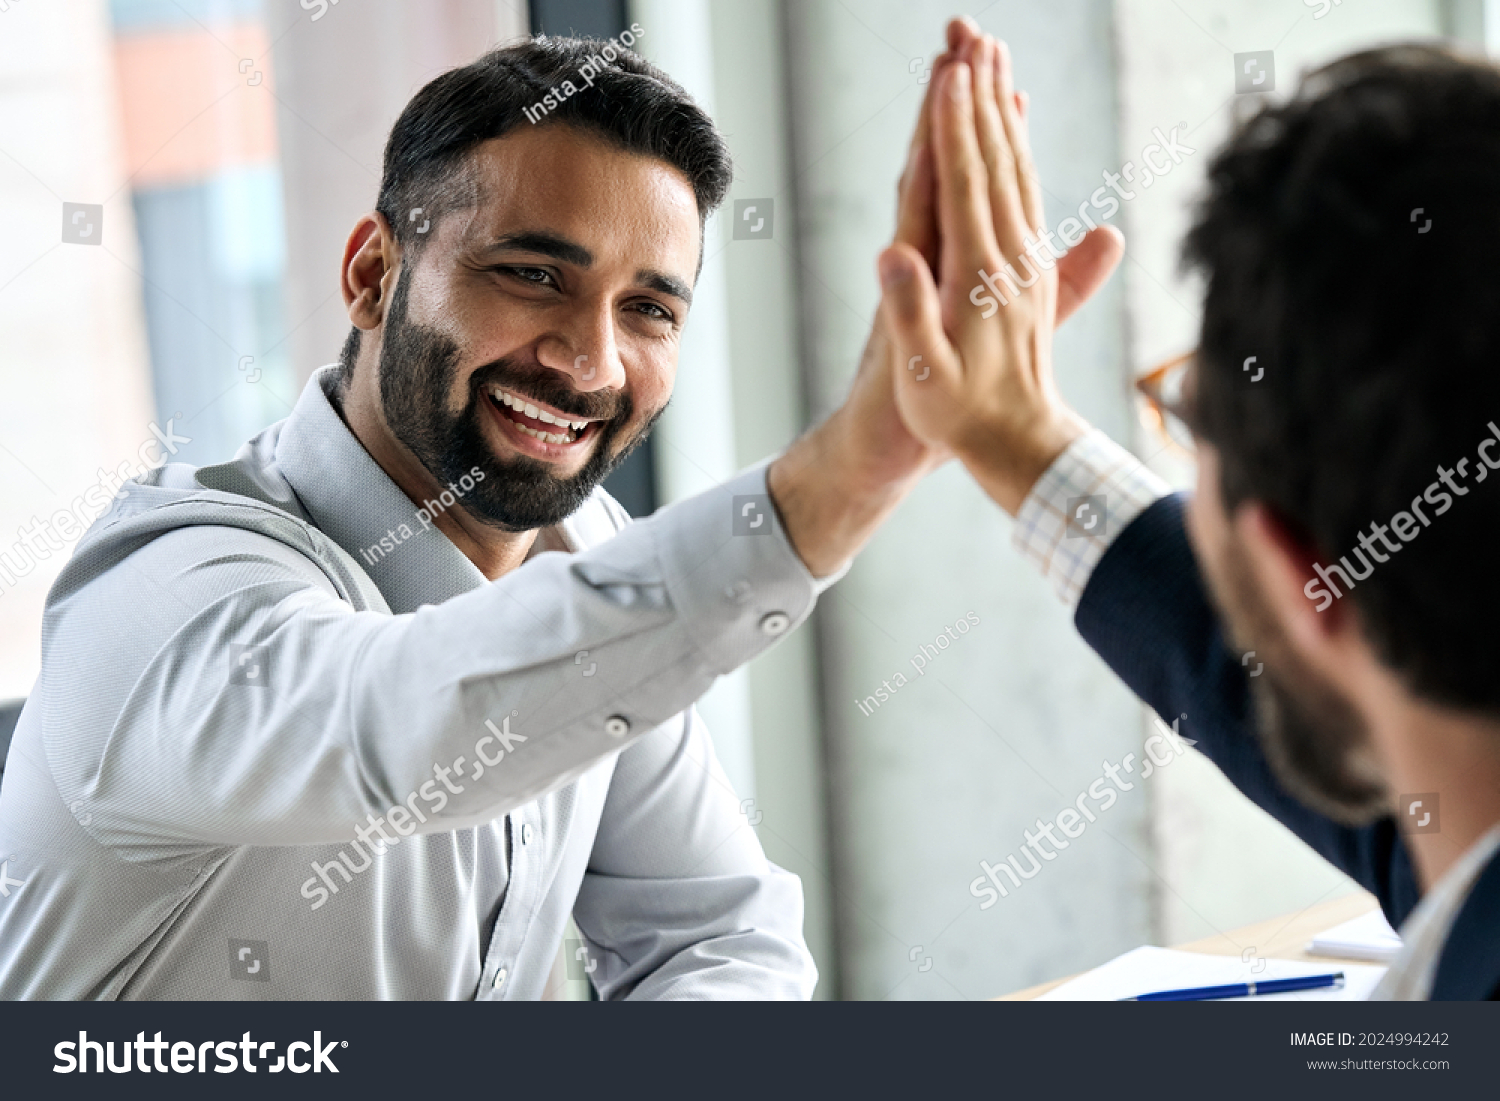 Indian happy smiling multiracial professional ceo businessman giving highfive to business partner after financial acquisition bank bargain contract at office. High five concept. Over shoulder view. #2024994242